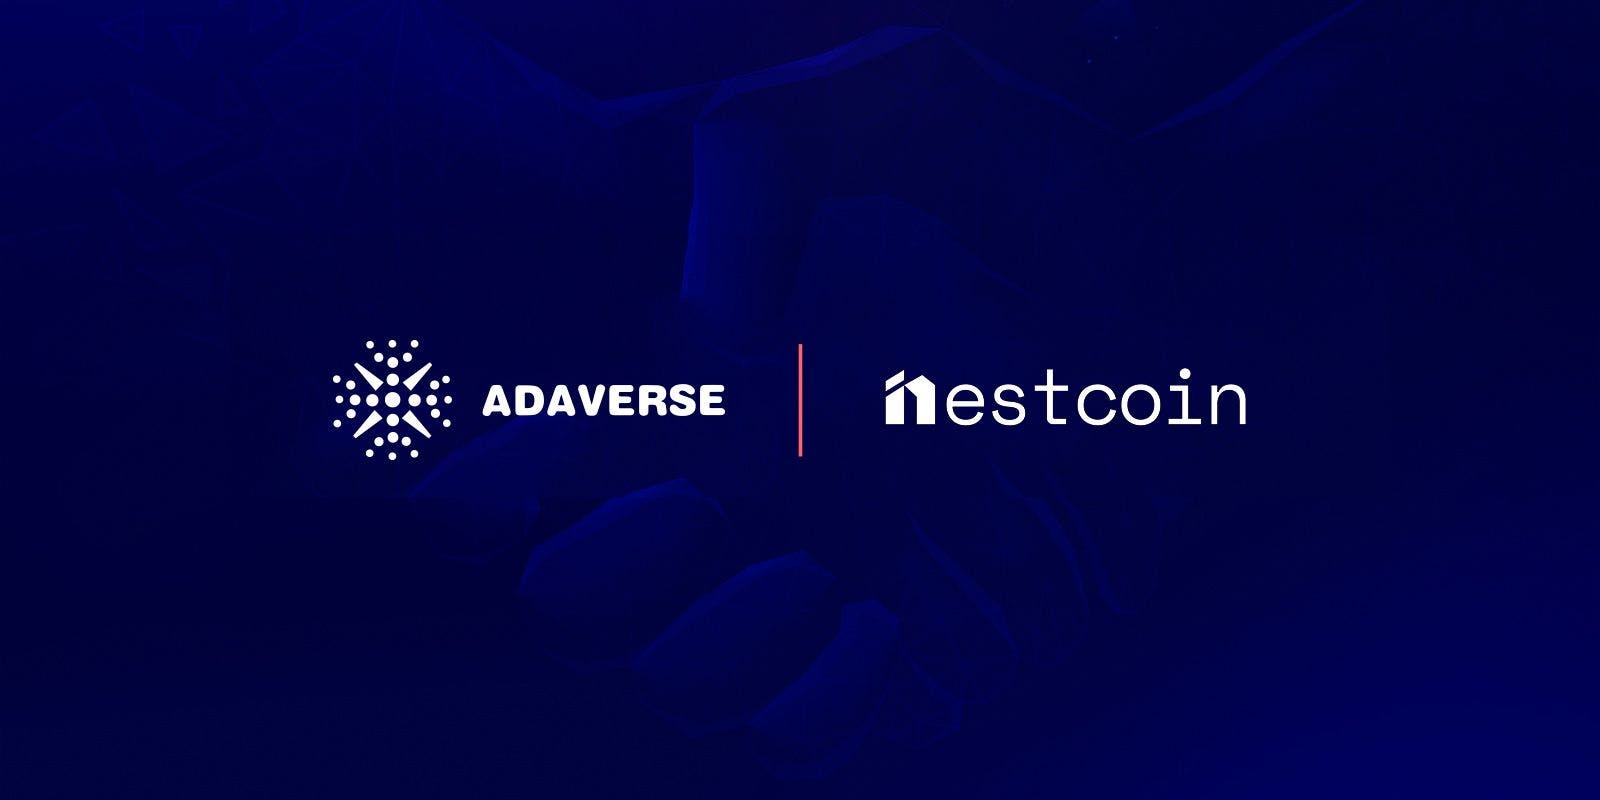 Cardano Accelerator, Adaverse Invests in Nestcoin to Catalyze Financial Inclusion in Africa